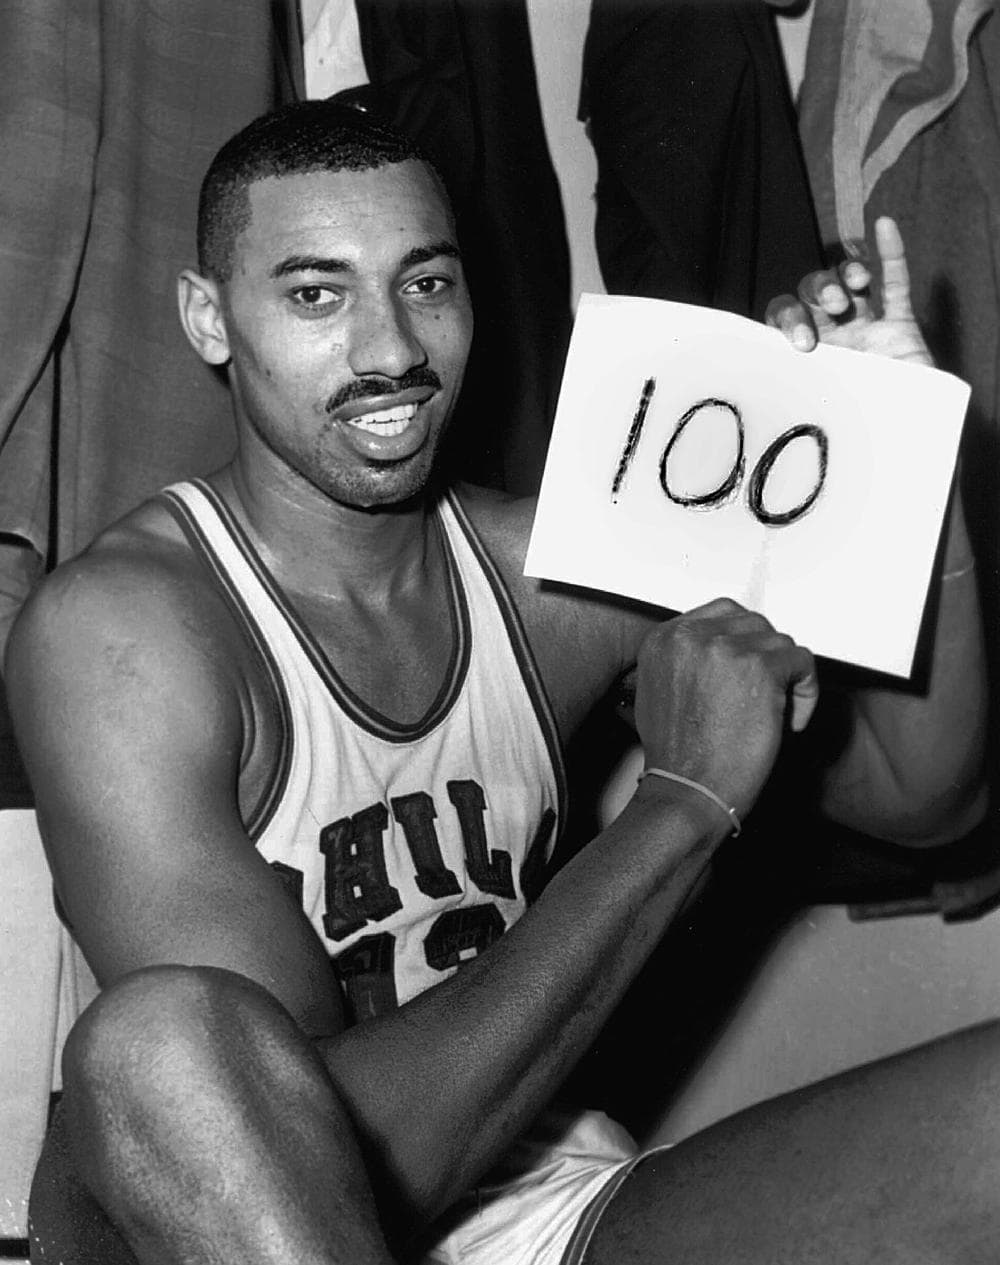 Wilt Chamberlain after his 100 point game in 1962. (AP)